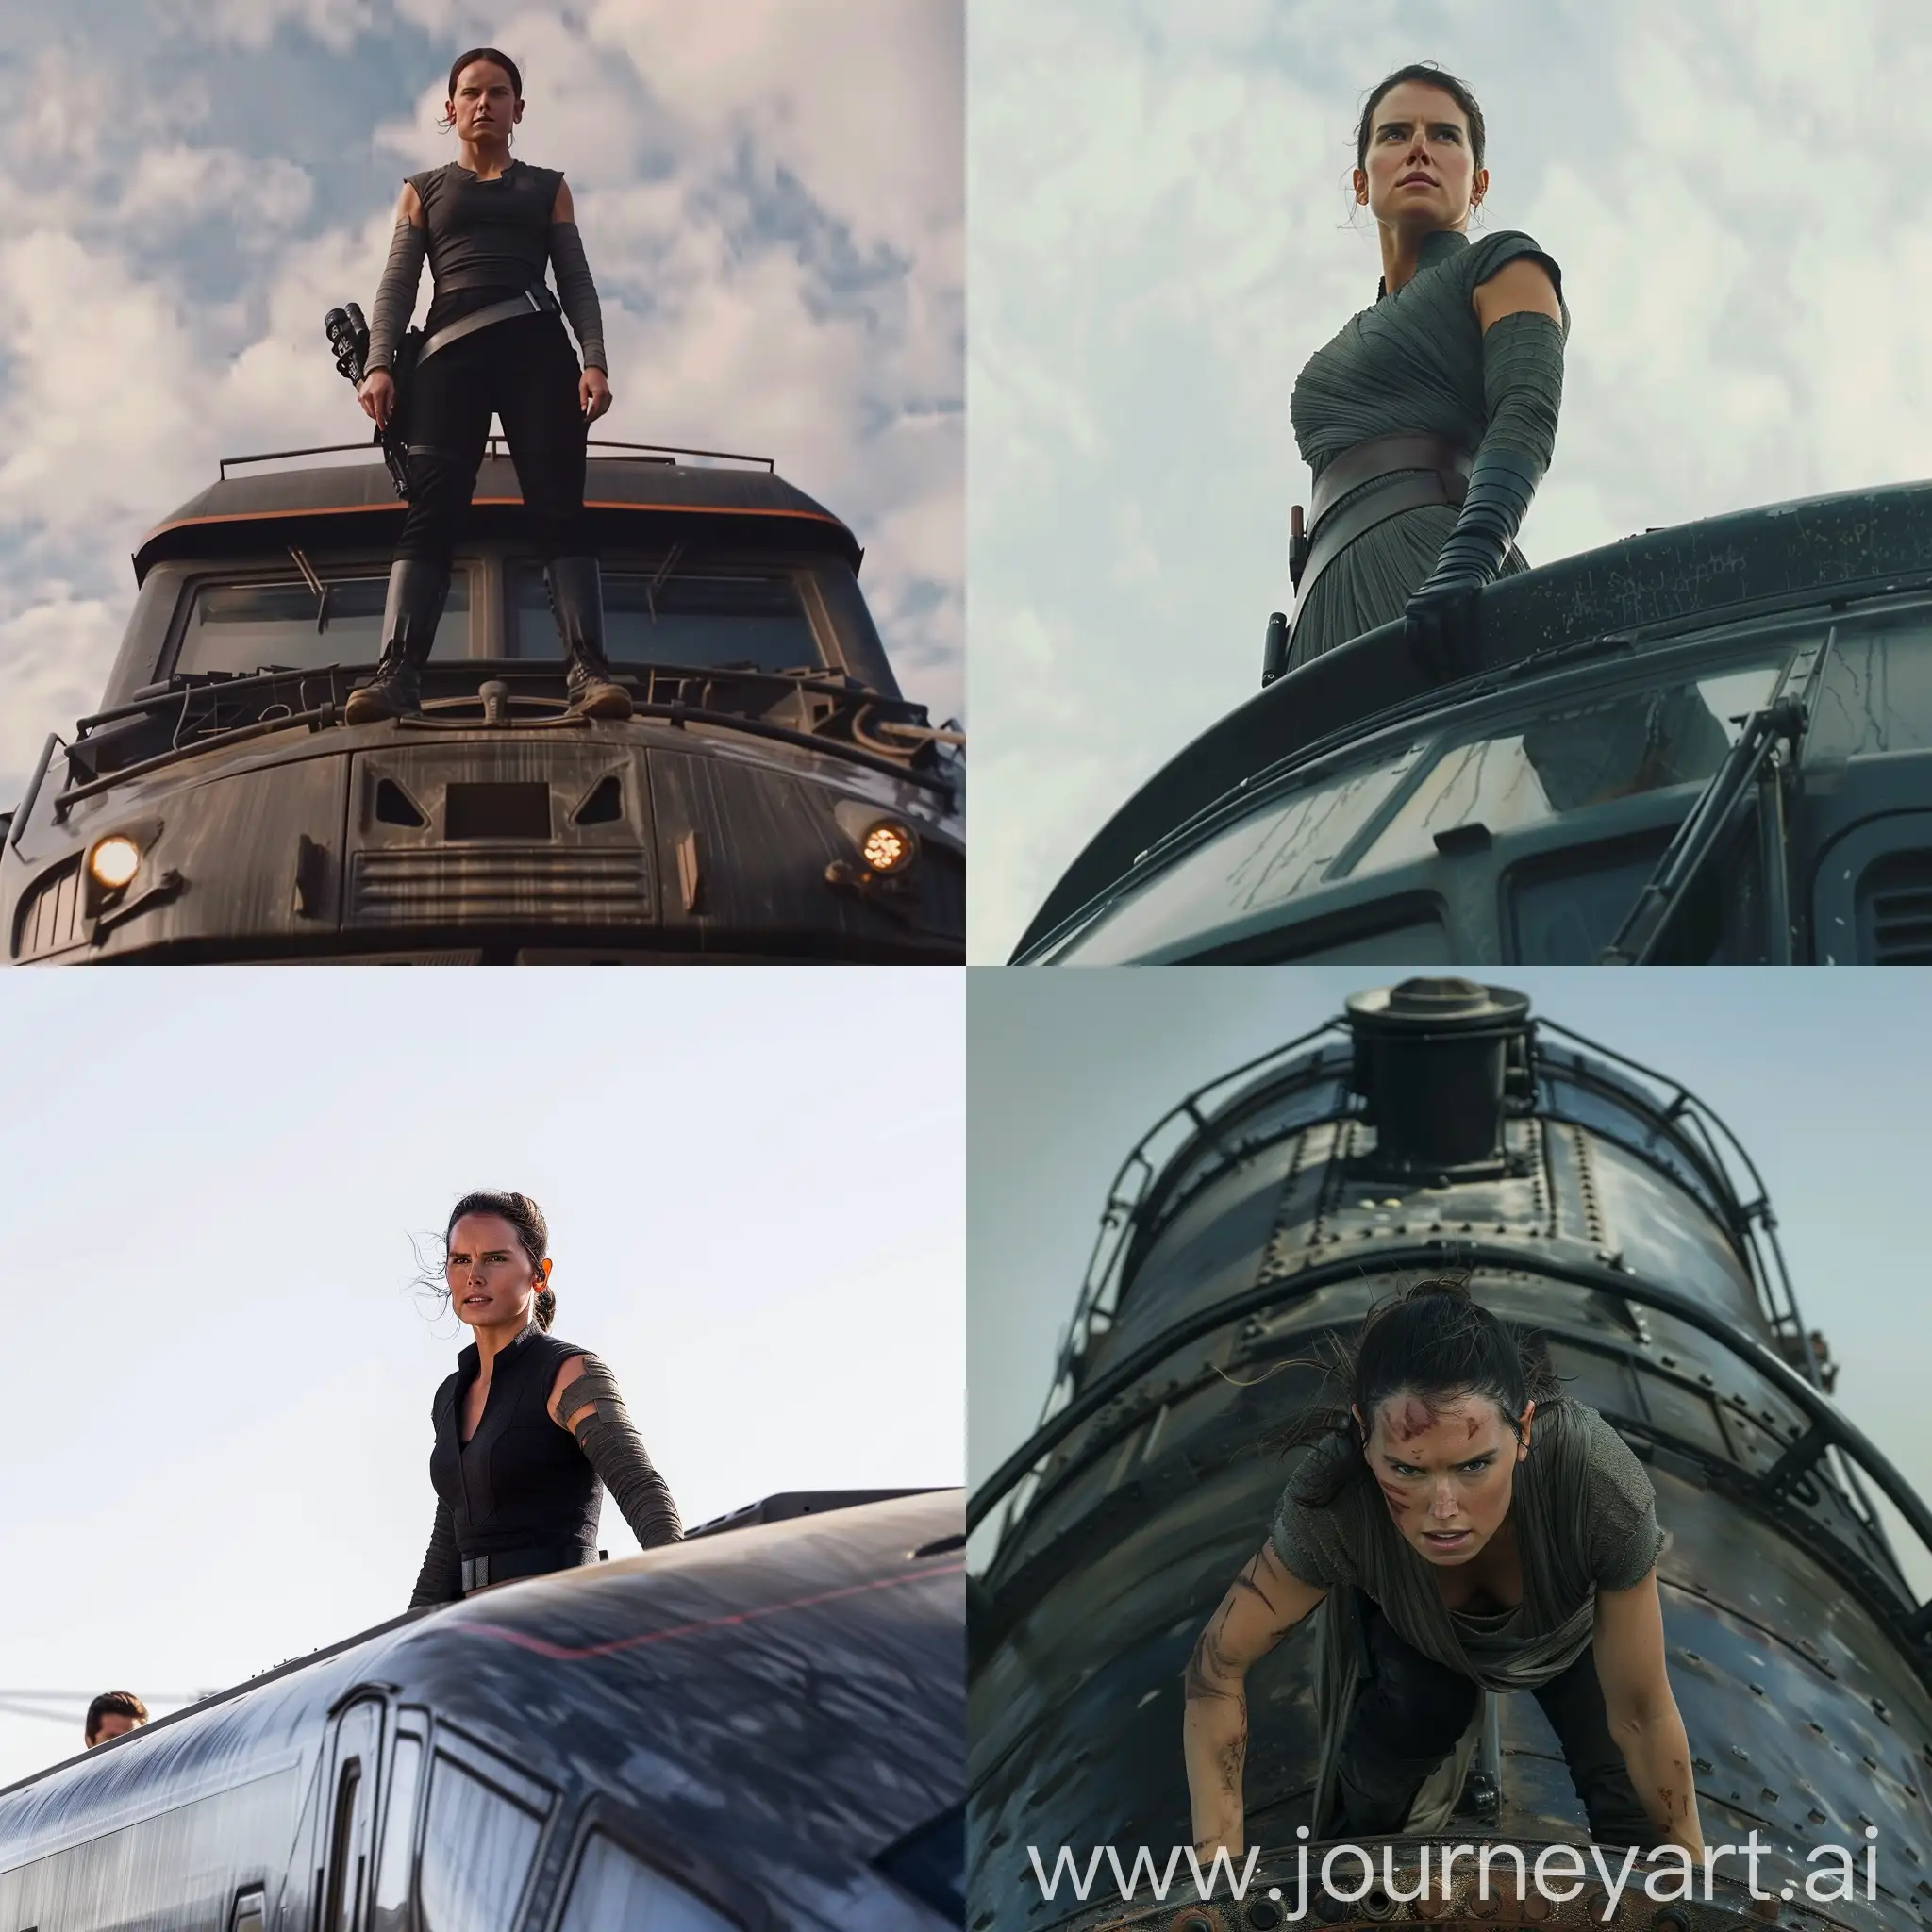 Daisy Ridley With Rey Skywalker's face in New Movie of mission Impossible With tom Cruise In a dangerous scene standing on top of the train in movement, 8k resolution 